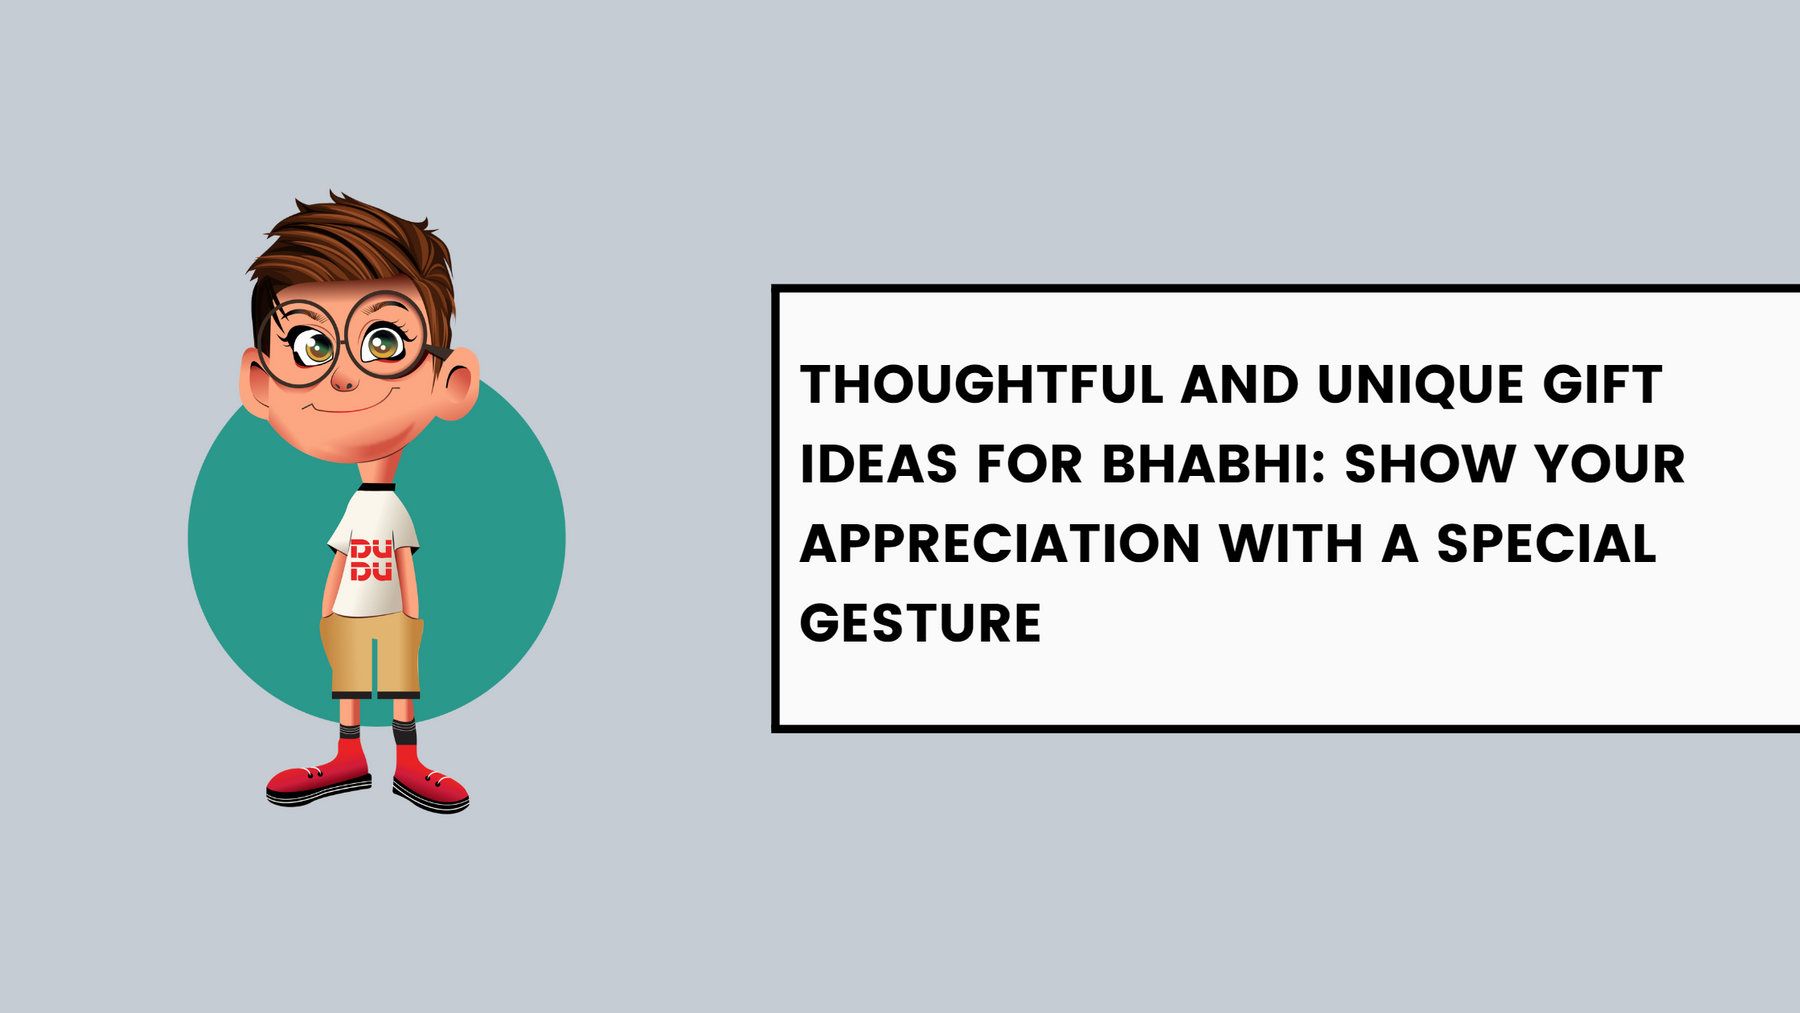 Thoughtful and Unique Gift Ideas for Bhabhi: Show Your Appreciation with a Special Gesture